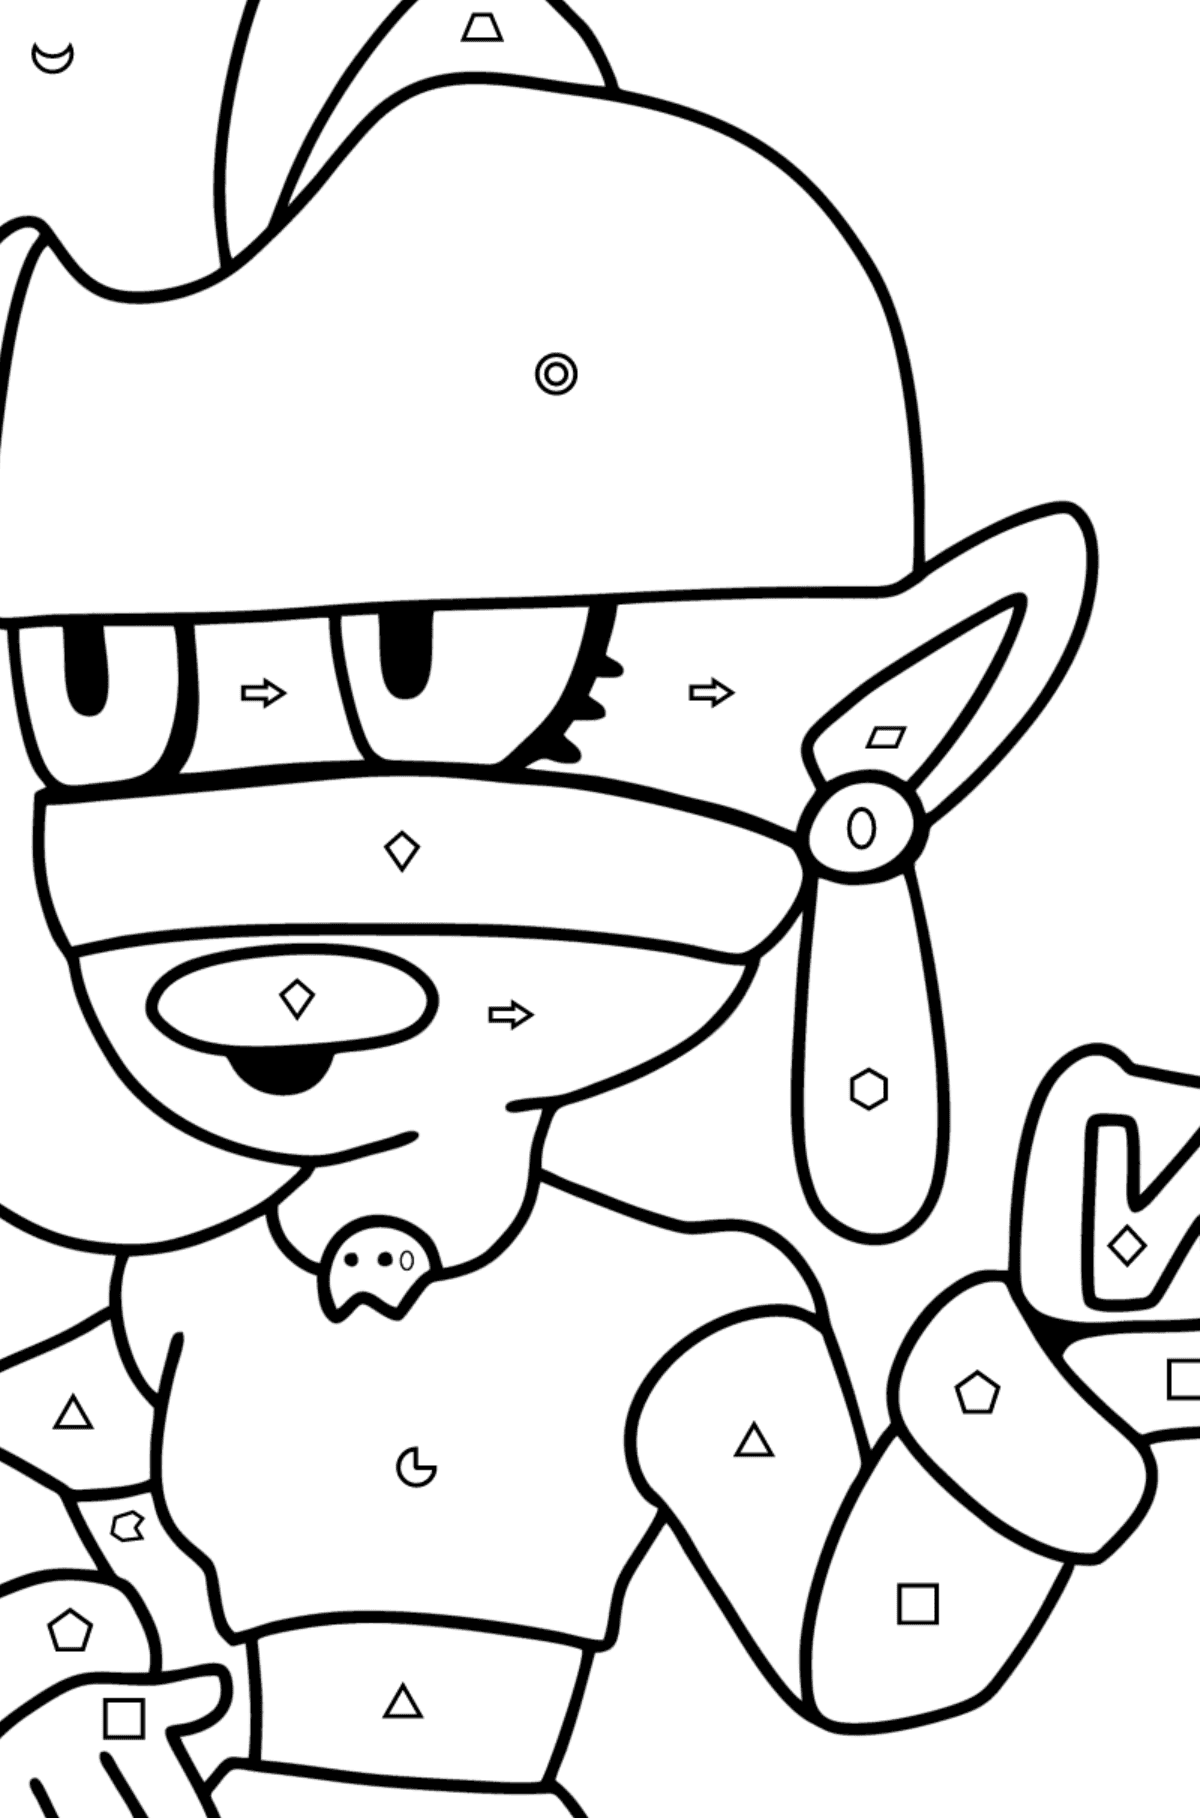 Brawl Stars Emz coloring page - Coloring by Geometric Shapes for Kids